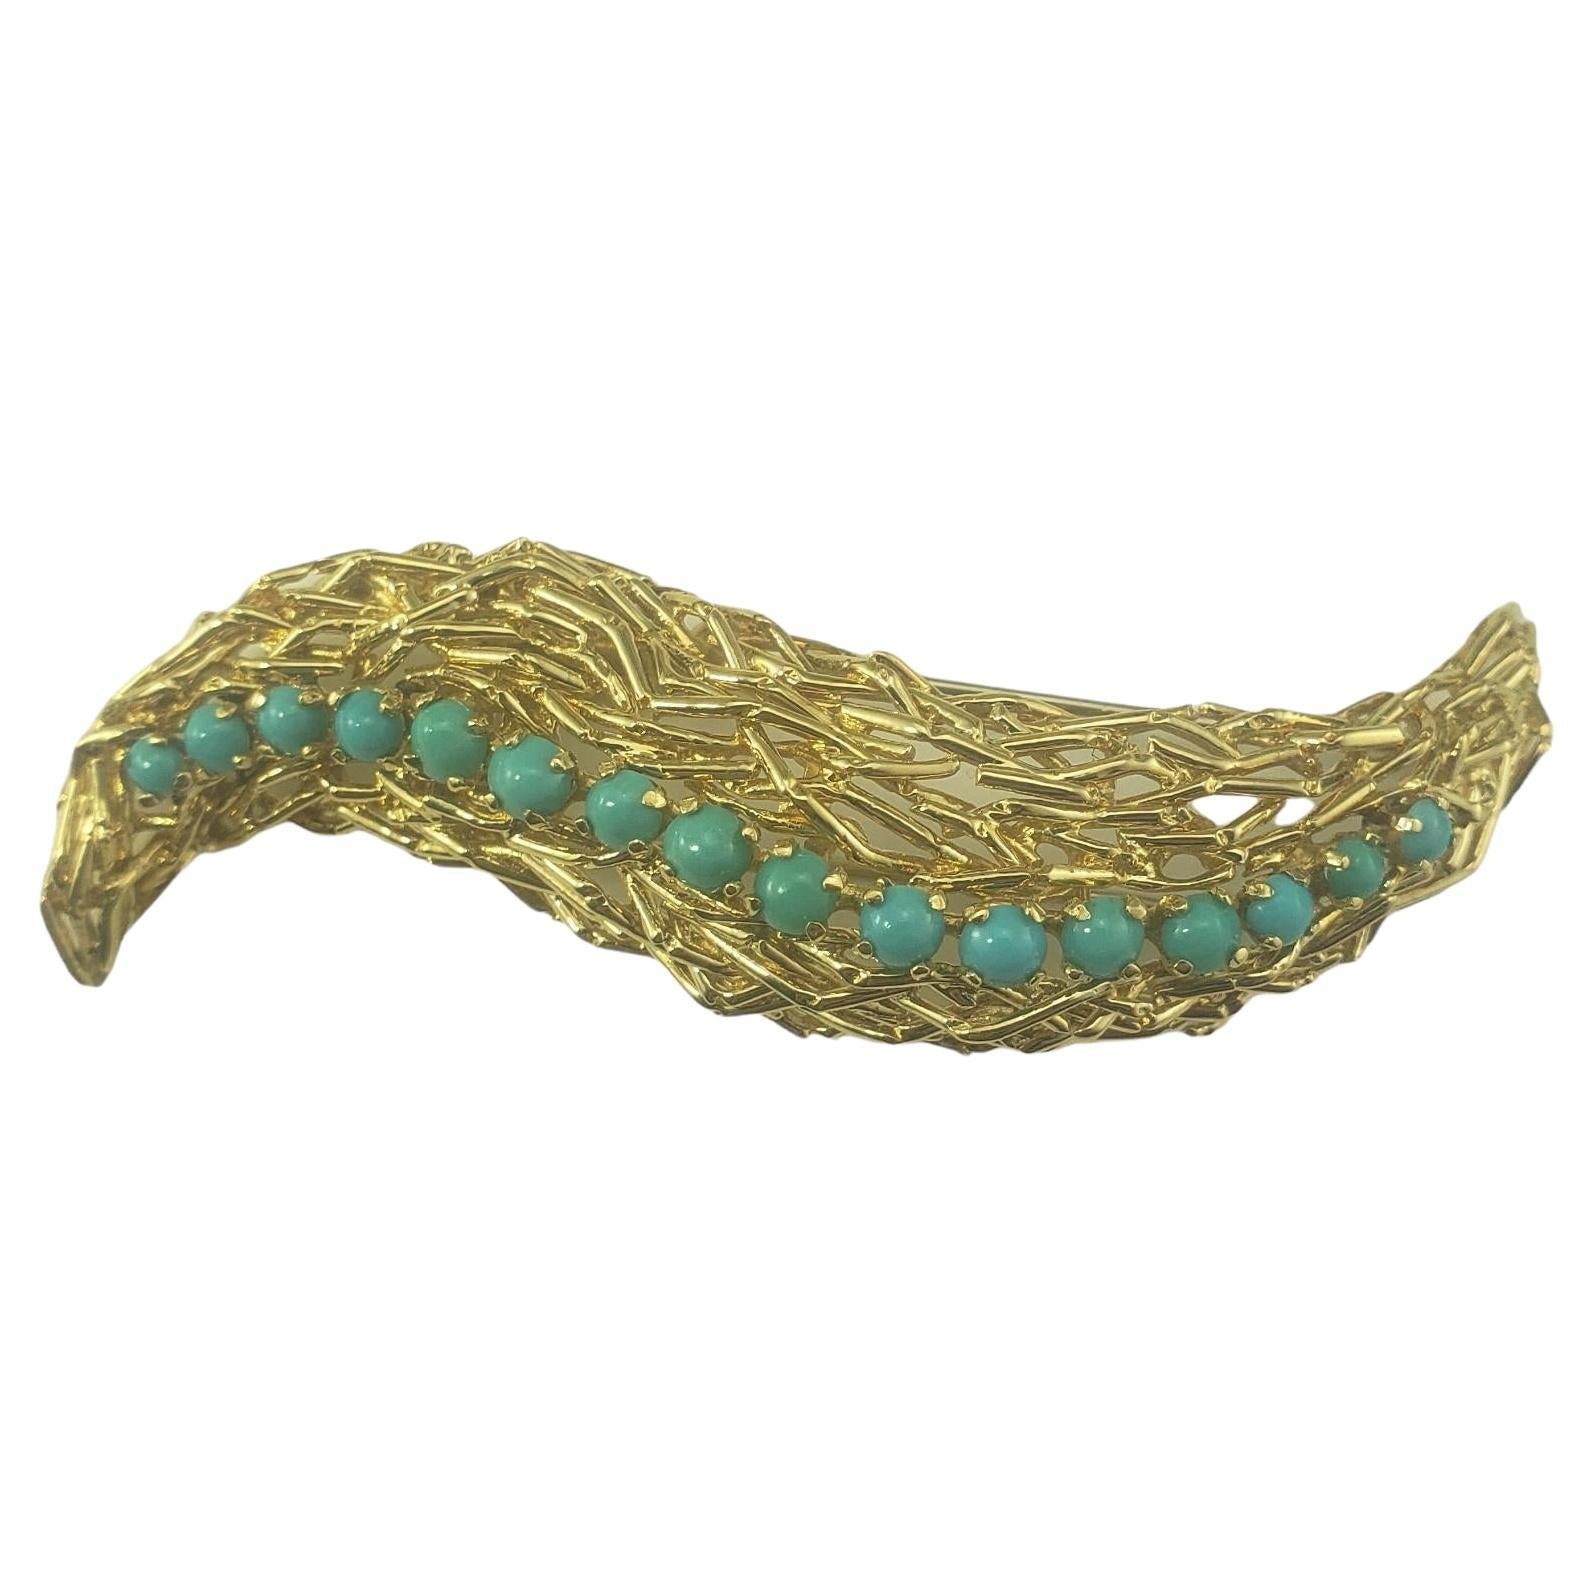 Tiffany & Co. 18 Karat Yellow Gold and Turquoise Brooch/Pin #16802 For Sale